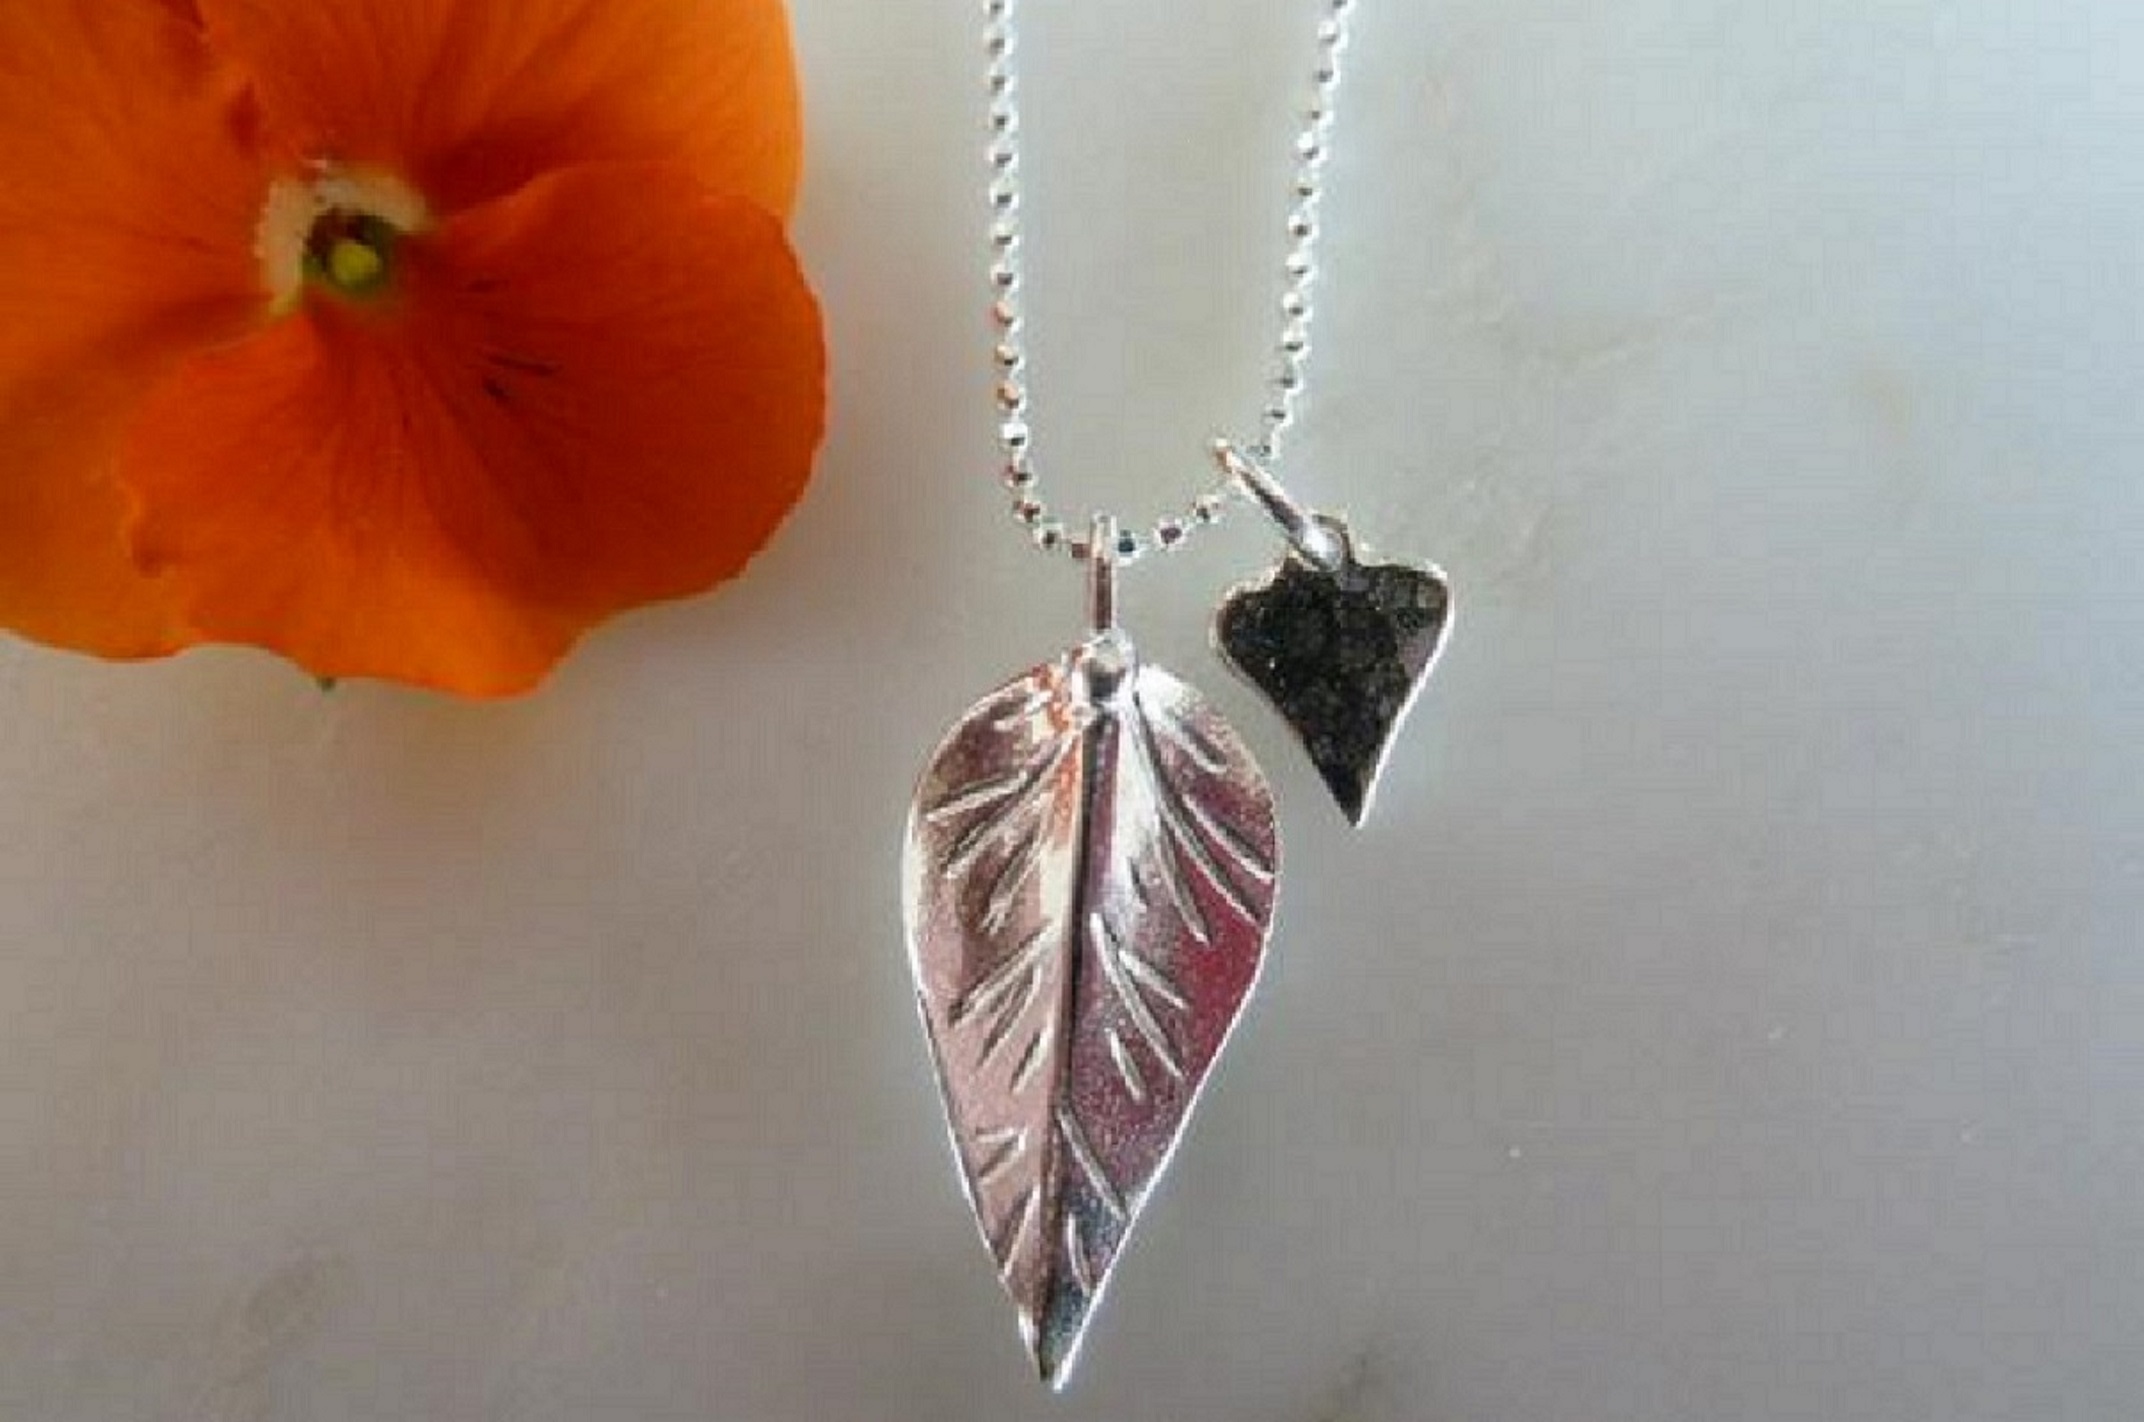 Jewellery. A silver leaf and heart necklace.